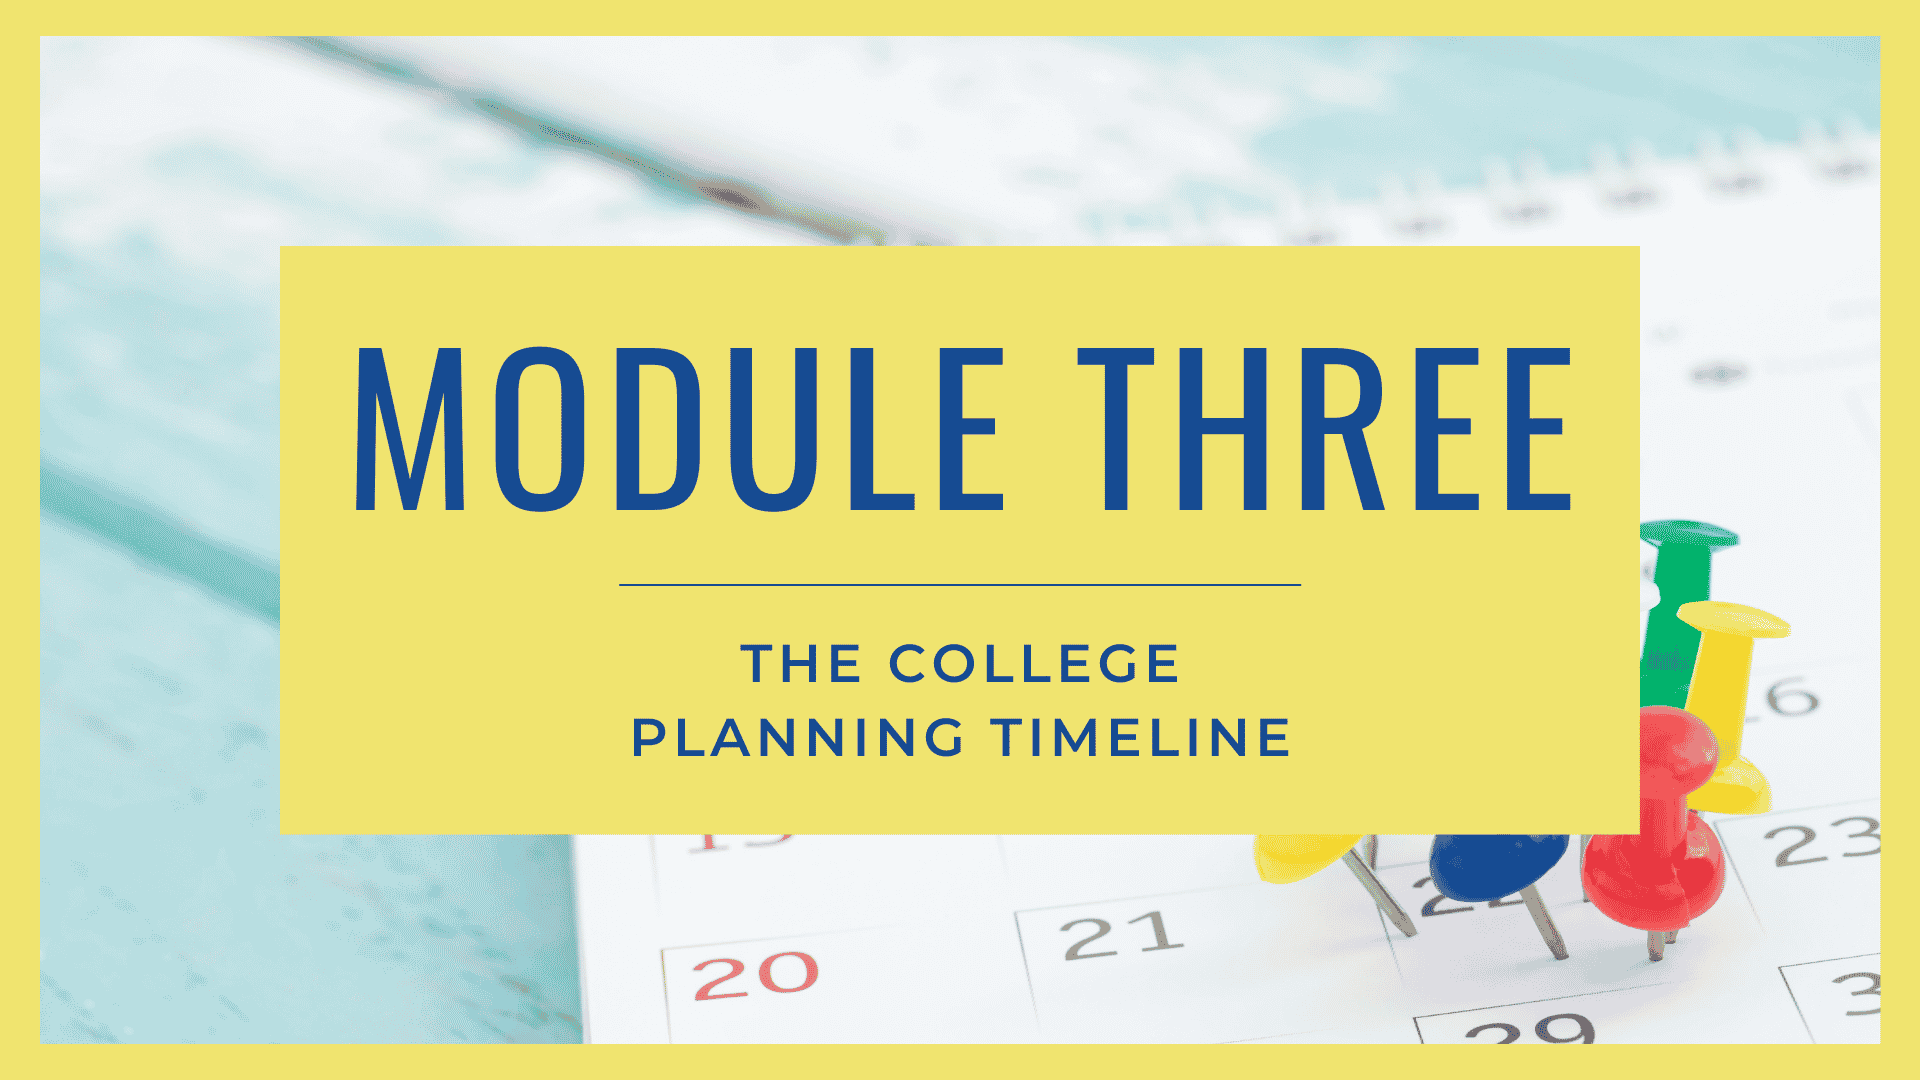 The college planning timeline